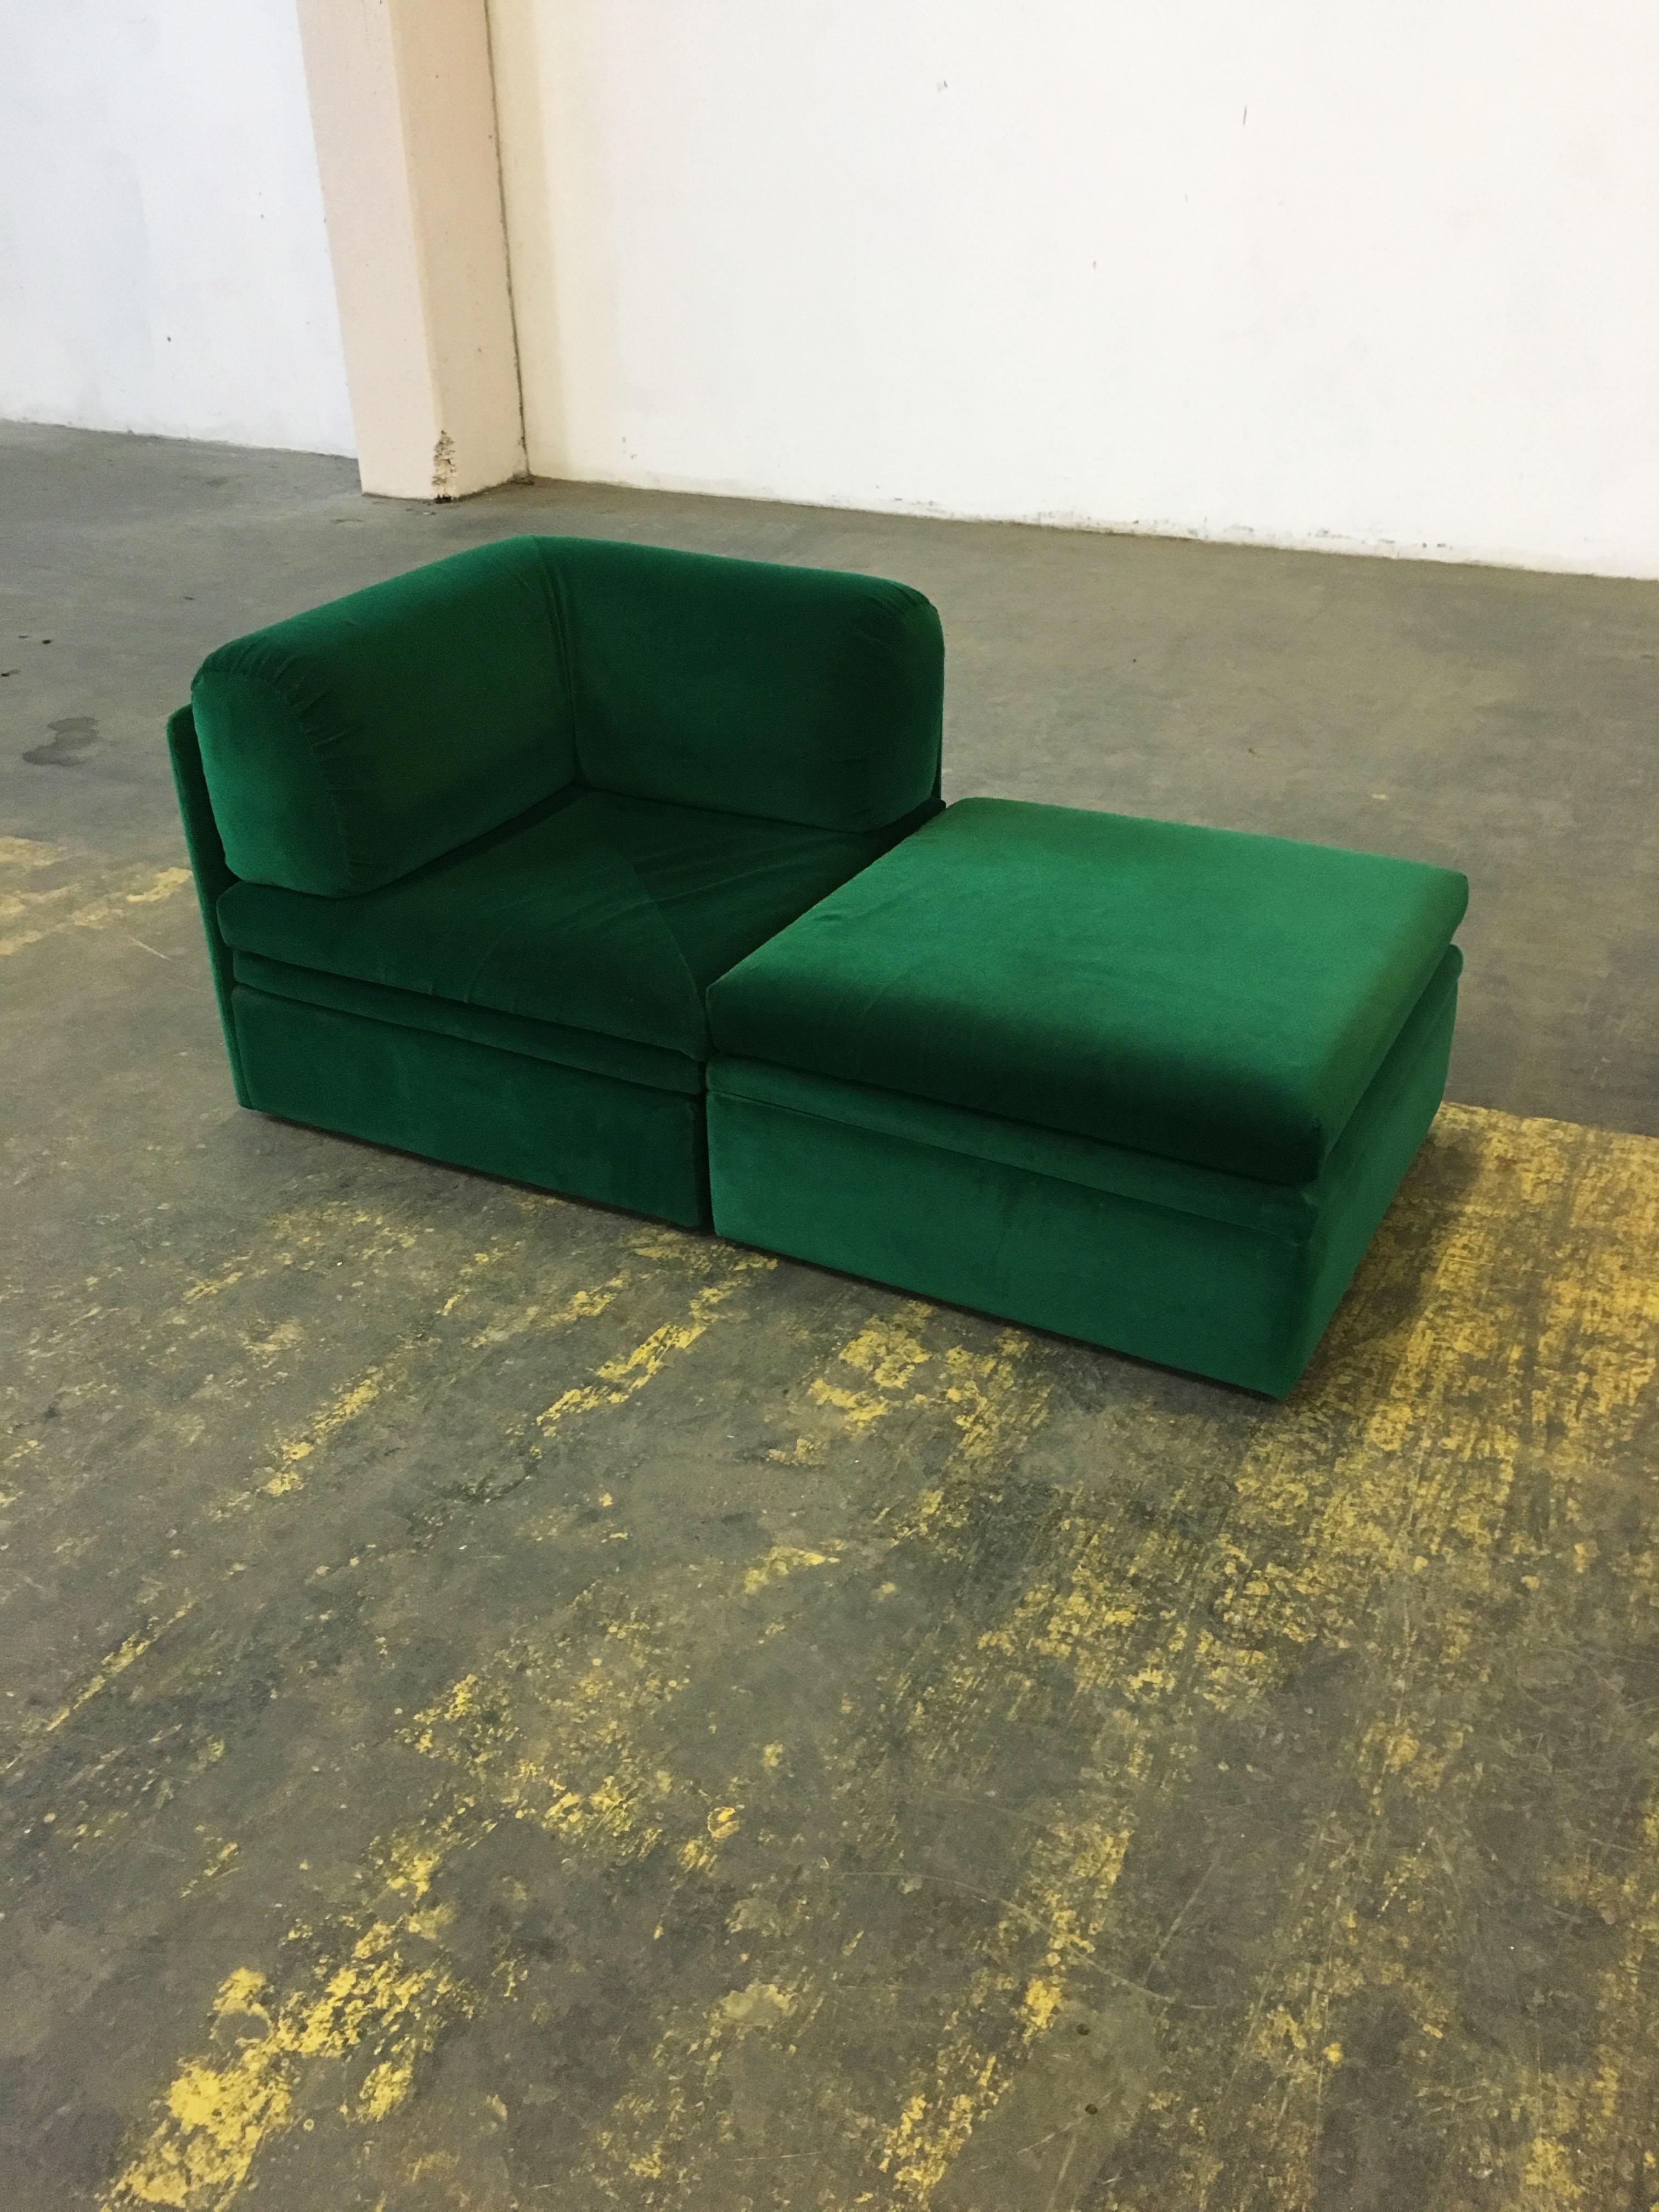 Lovely vintage Altana Divani and Poltrone daybed sectional sofa in original emerald green velvet, Italy 1970s. This two-piece modern Italian small sectional sofa or petite daybed (with built in storage ottoman) is simply sensational. Good and clean